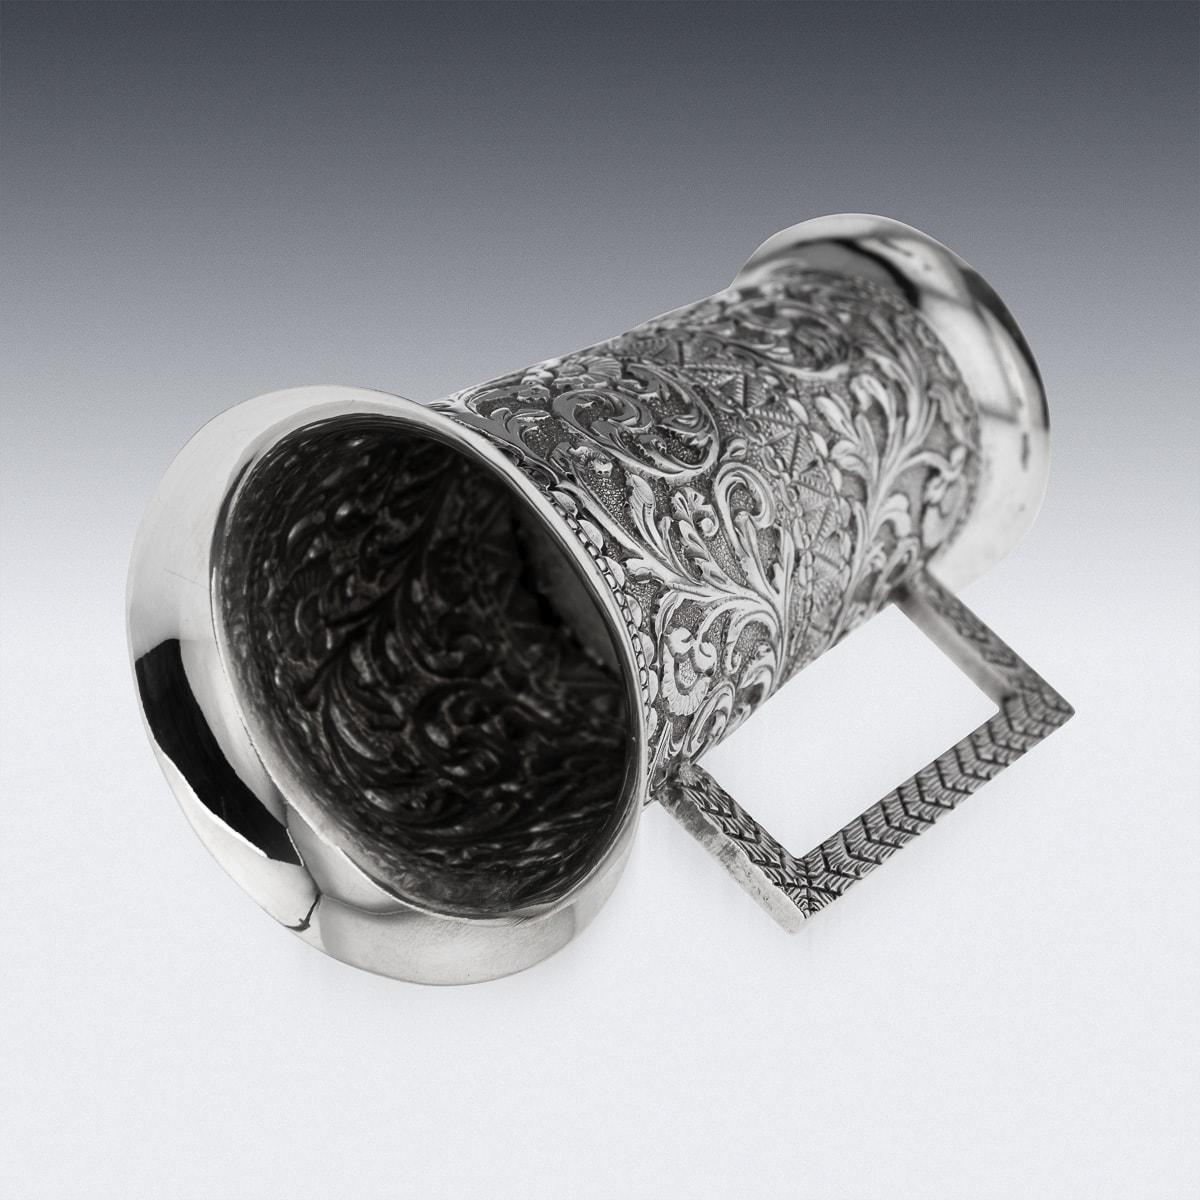 20th Century Edwardian Solid Silver Spirit Measure Cup, London, c.1901 For Sale 2